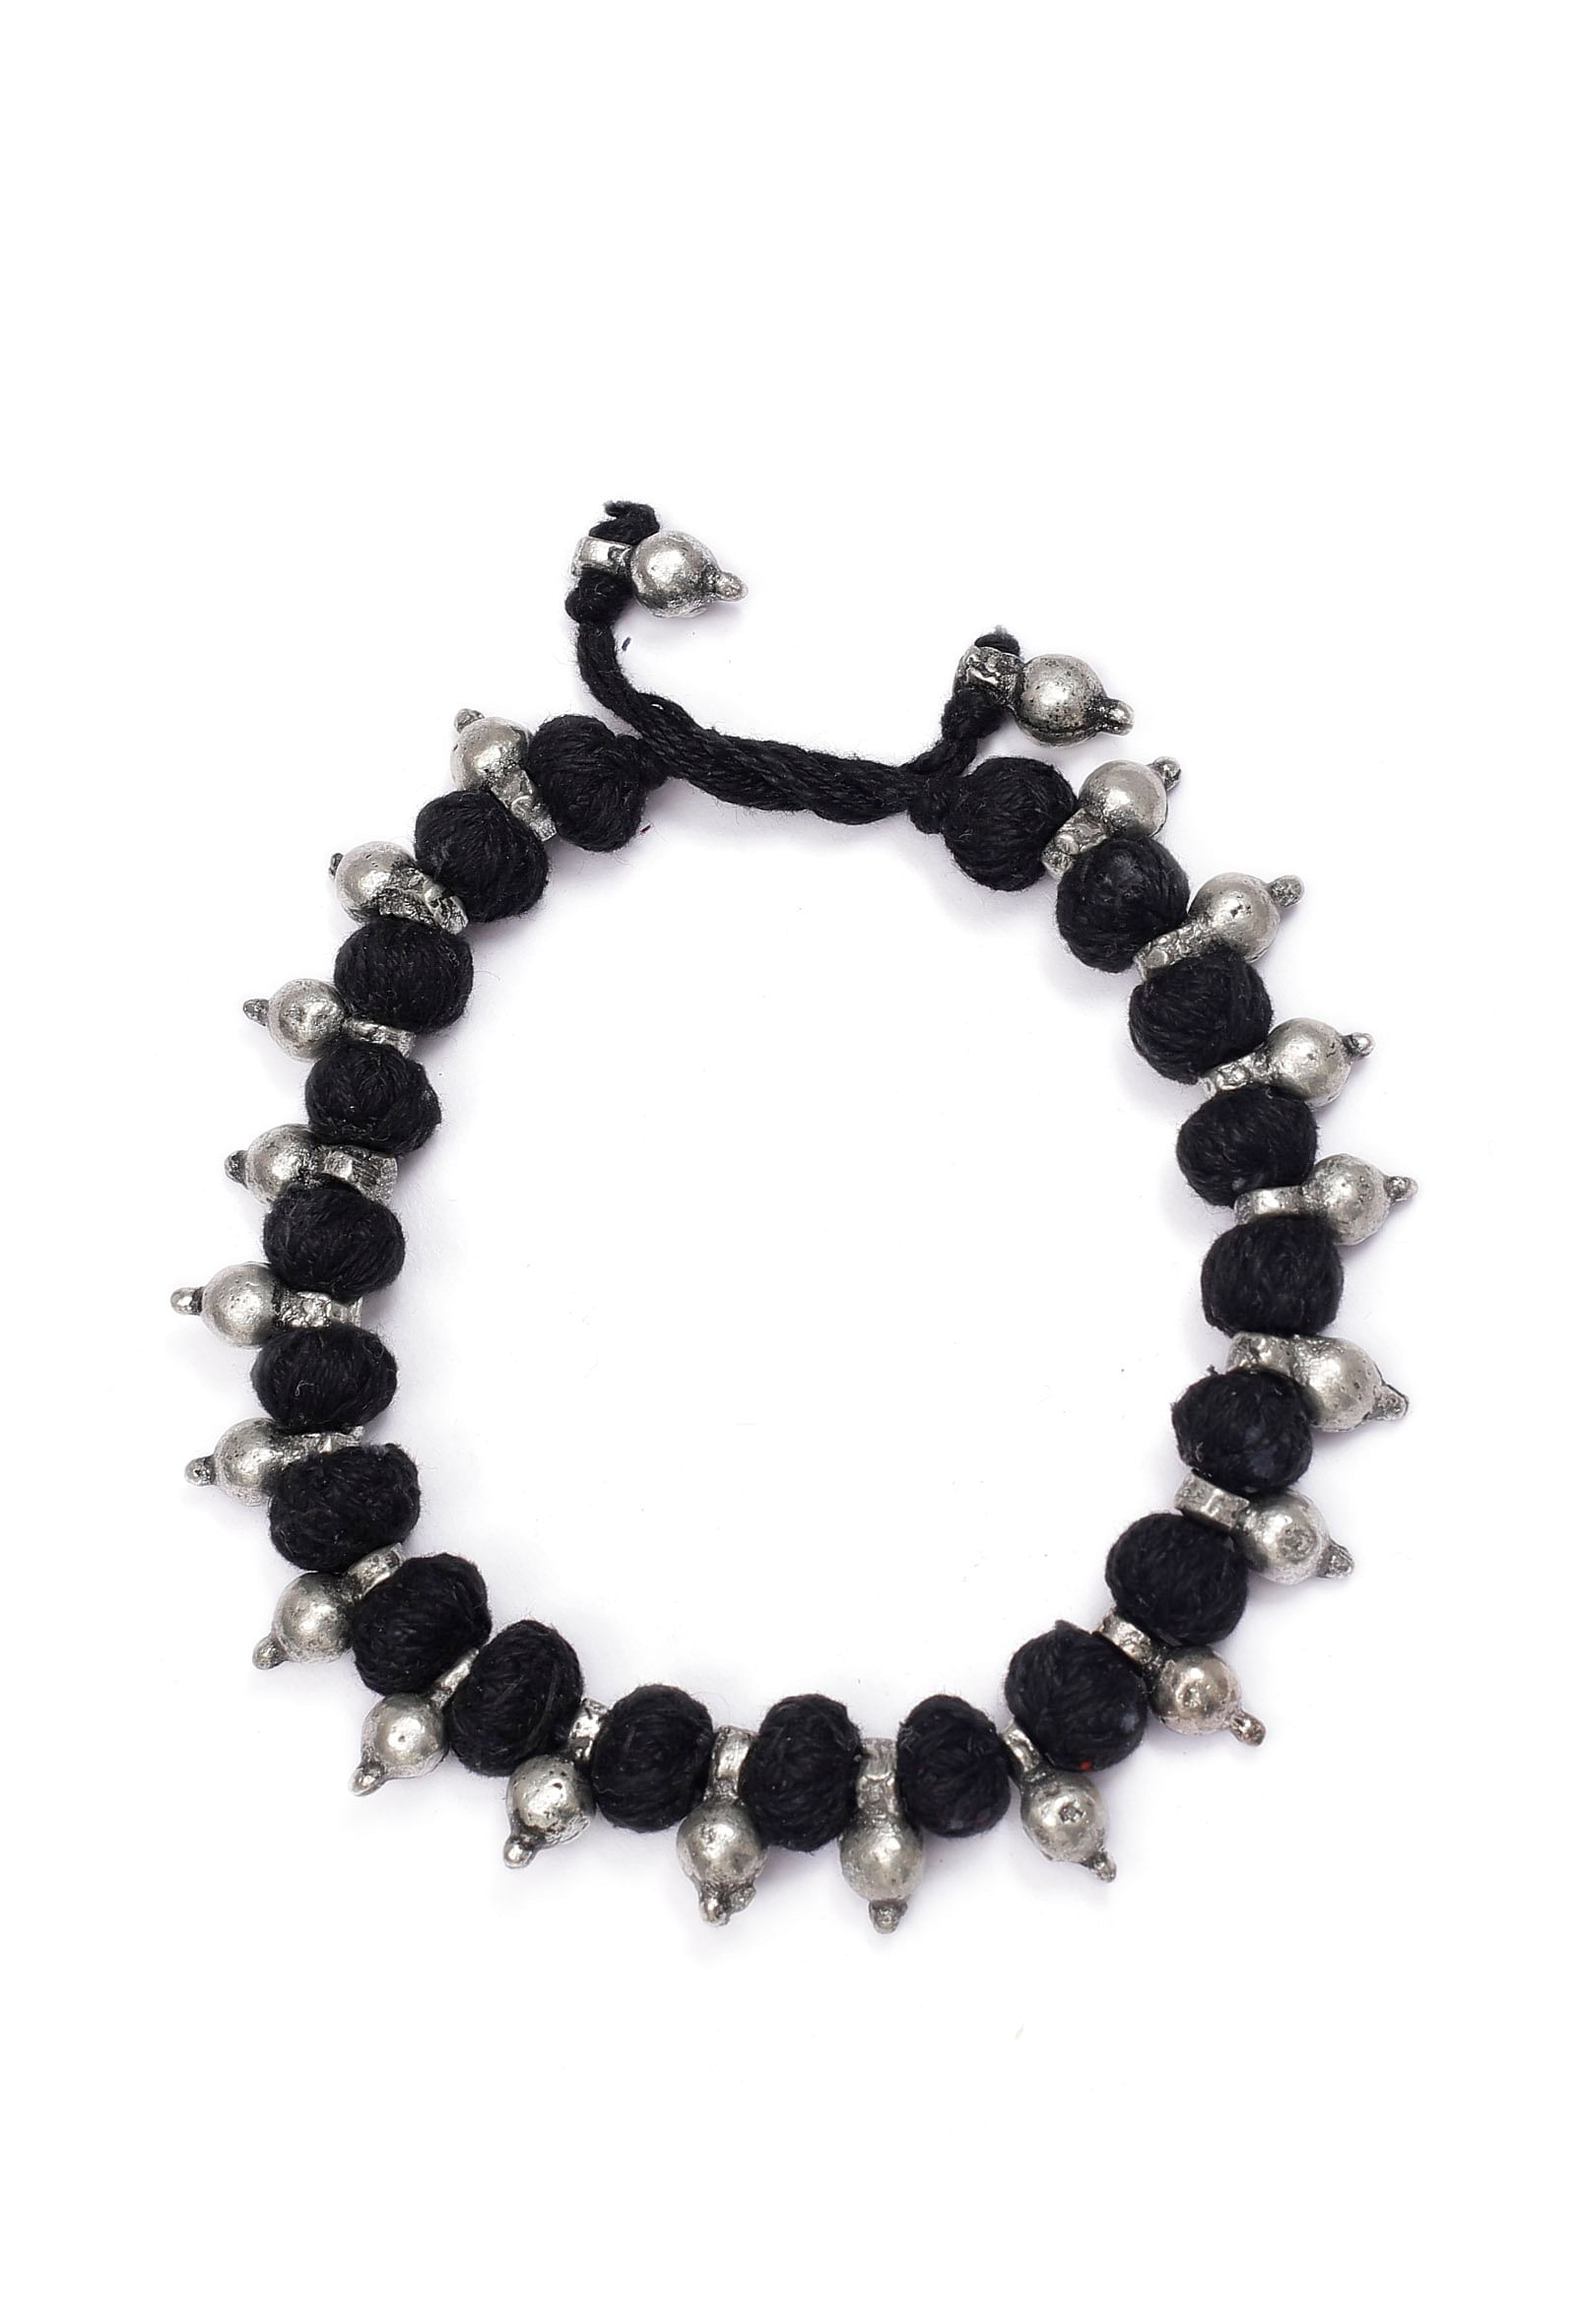 Set of 2: Black with Silver Beads Tribal Anklet